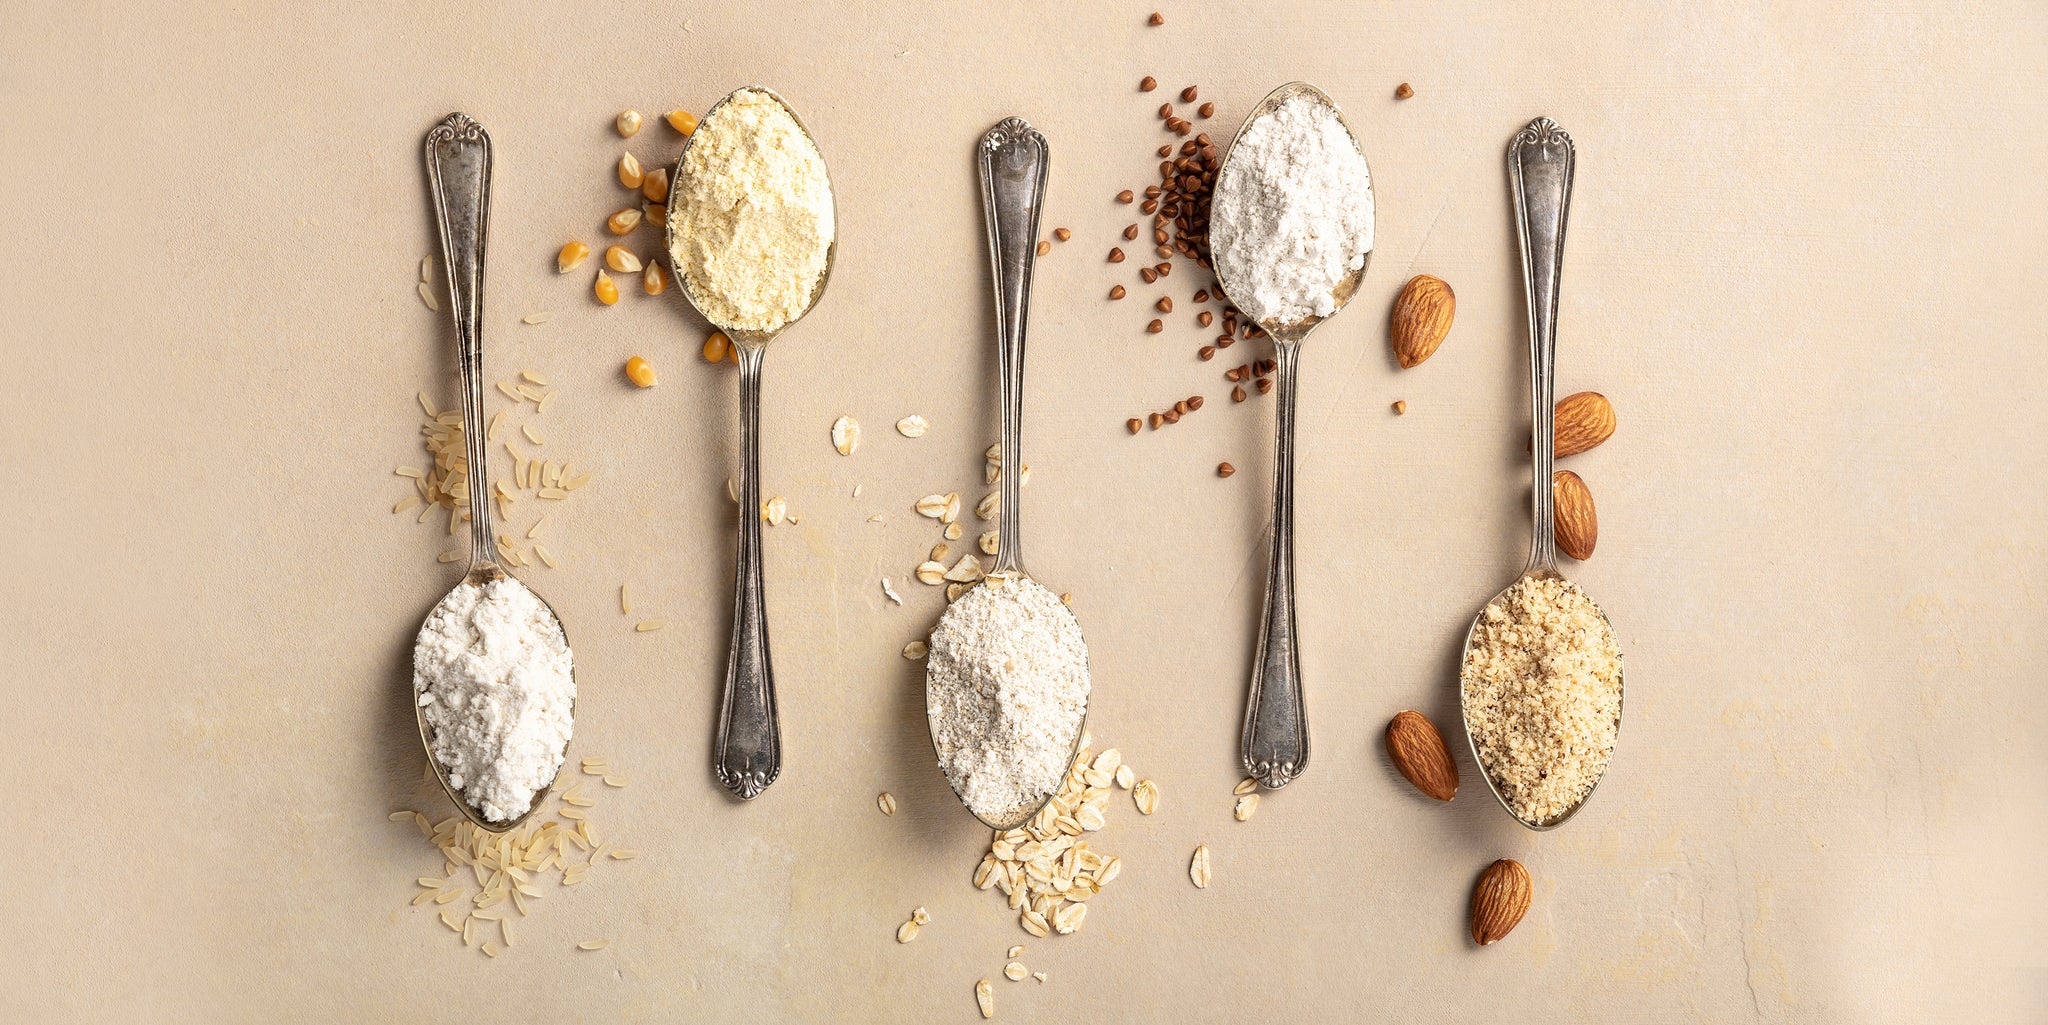 Five metal spoons with different types of gluten-free flour.